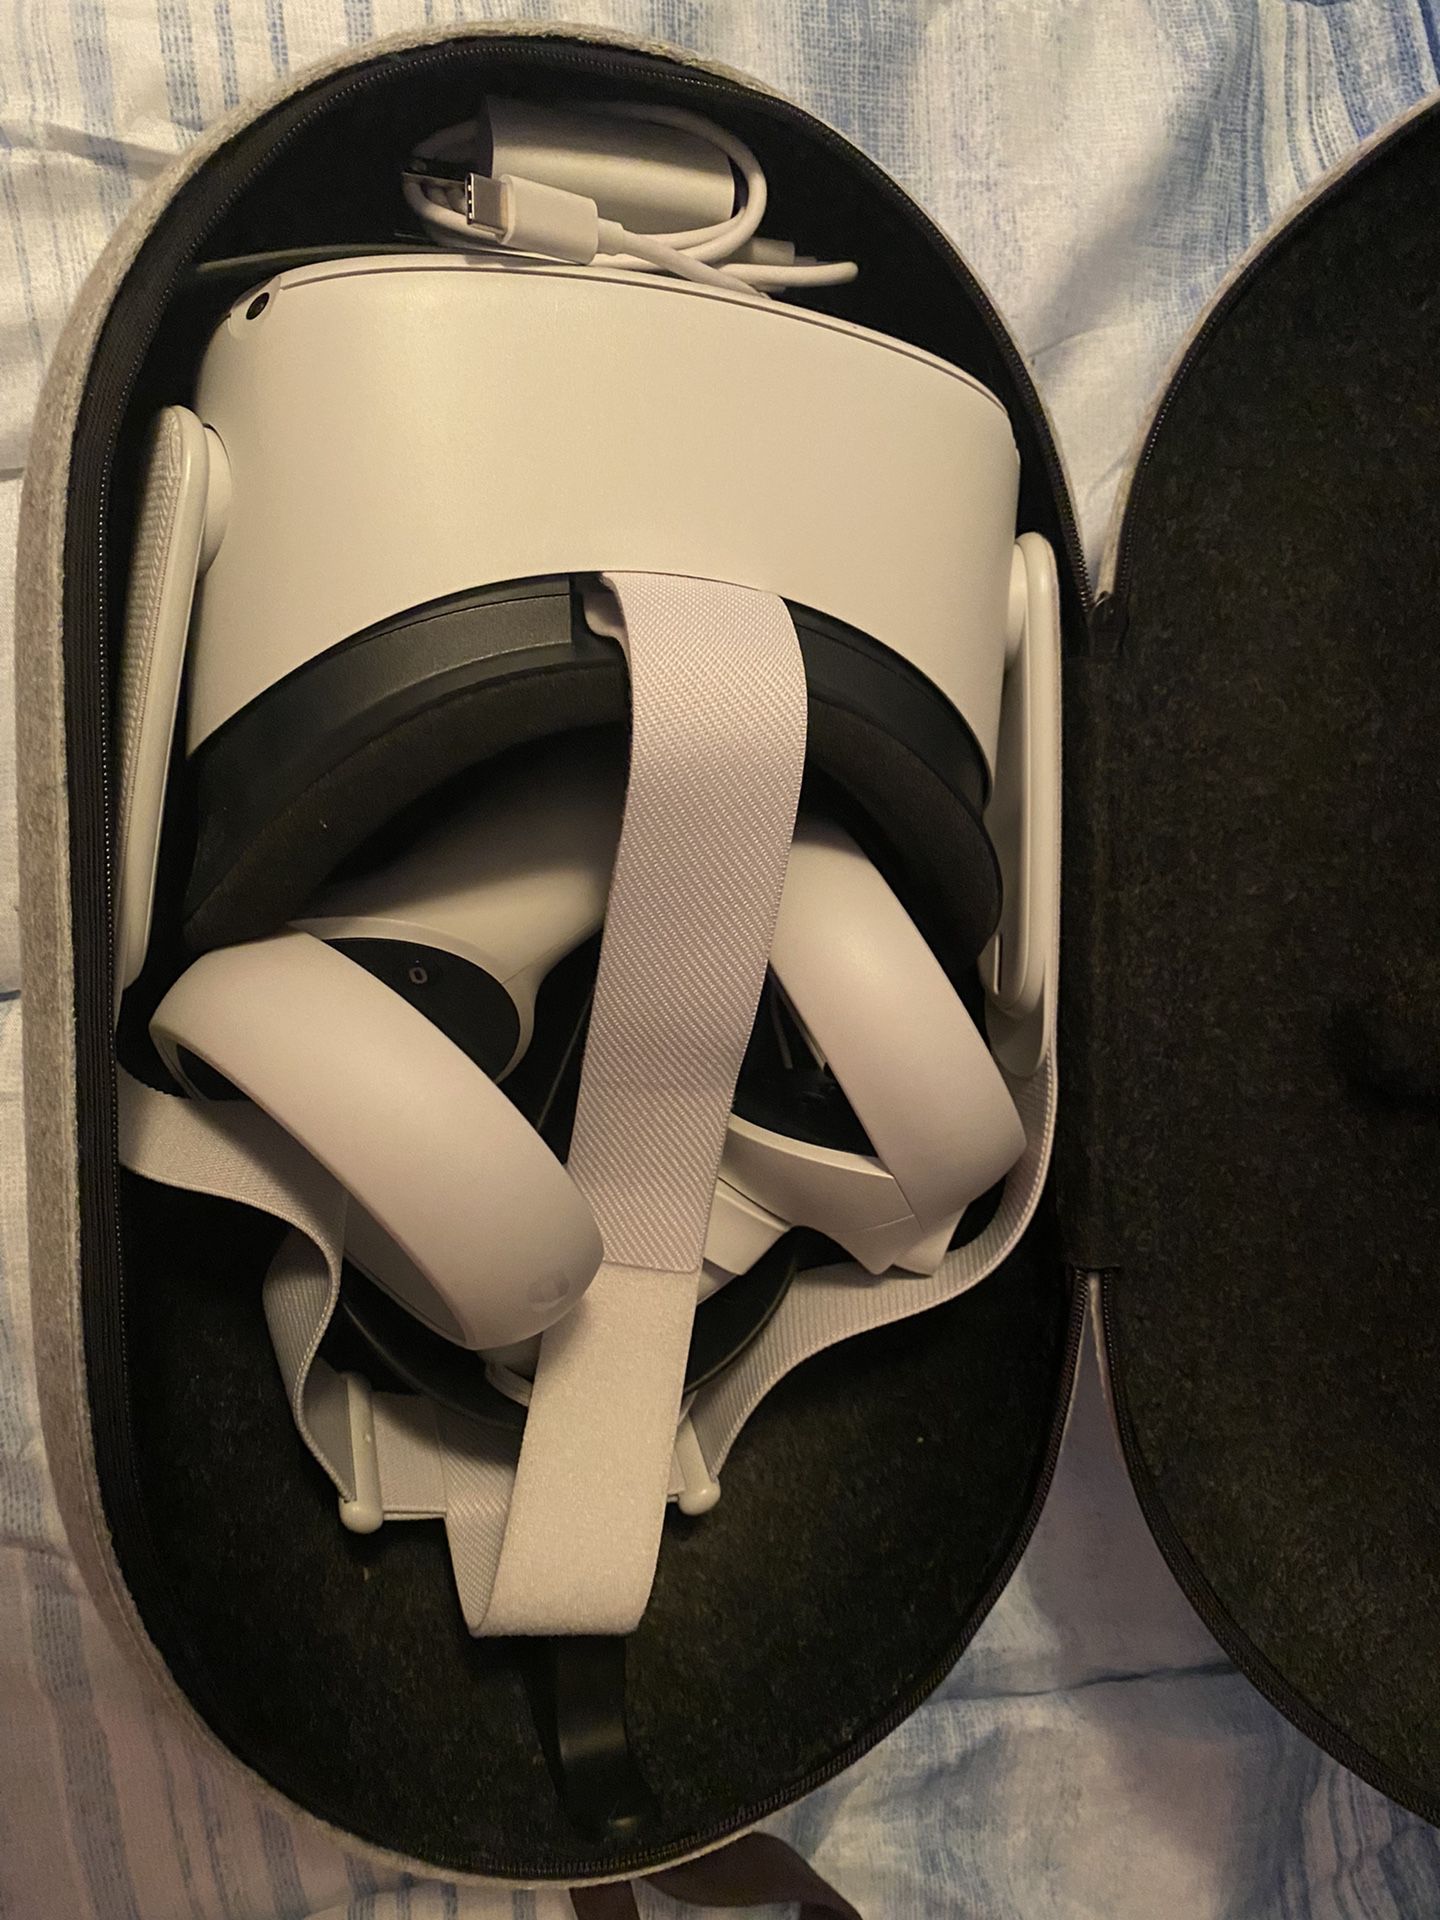 Oculus Quest 2 For Sale